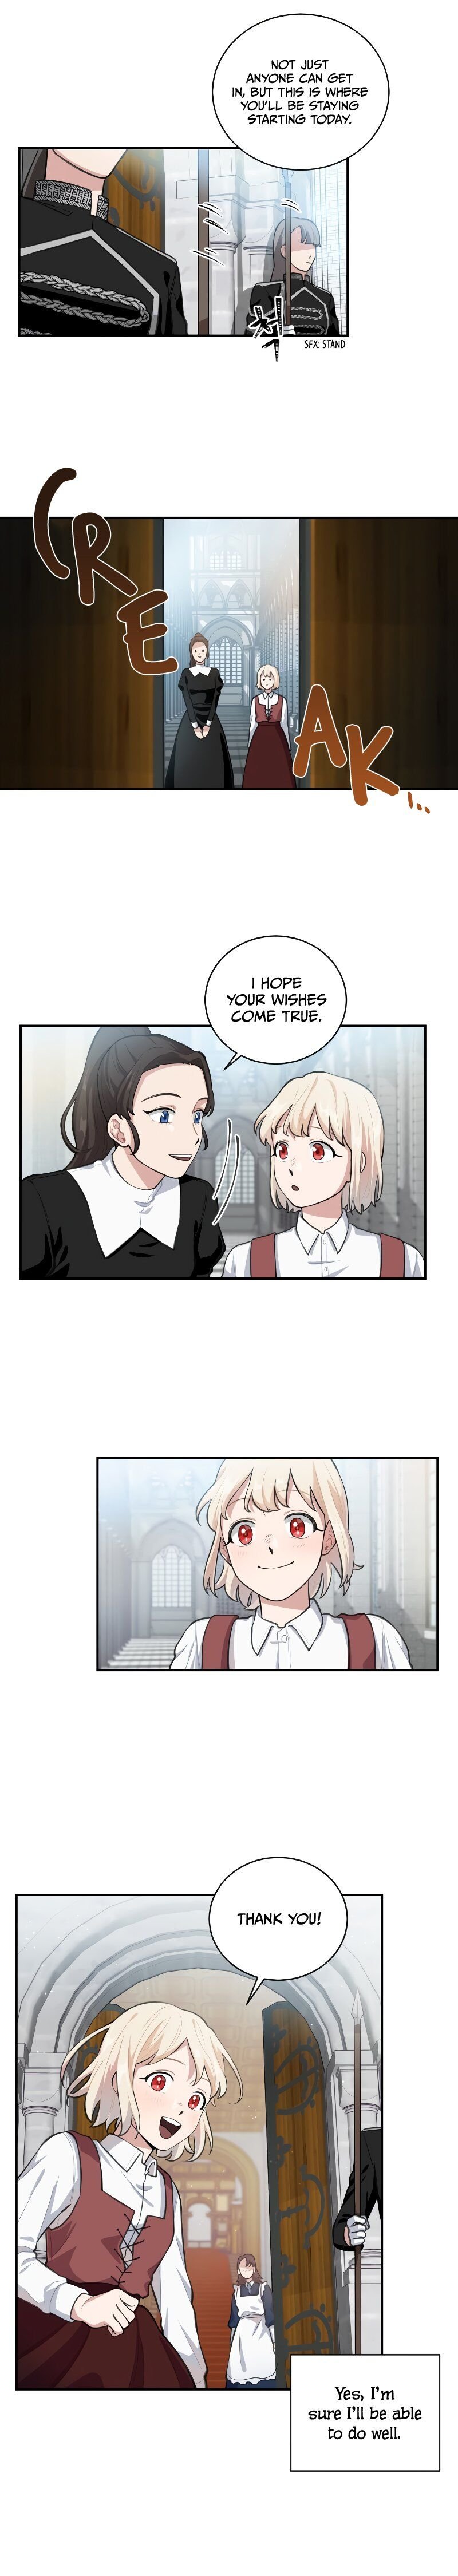 I Became a Maid in a TL Novel Chapter 3 - Page 4